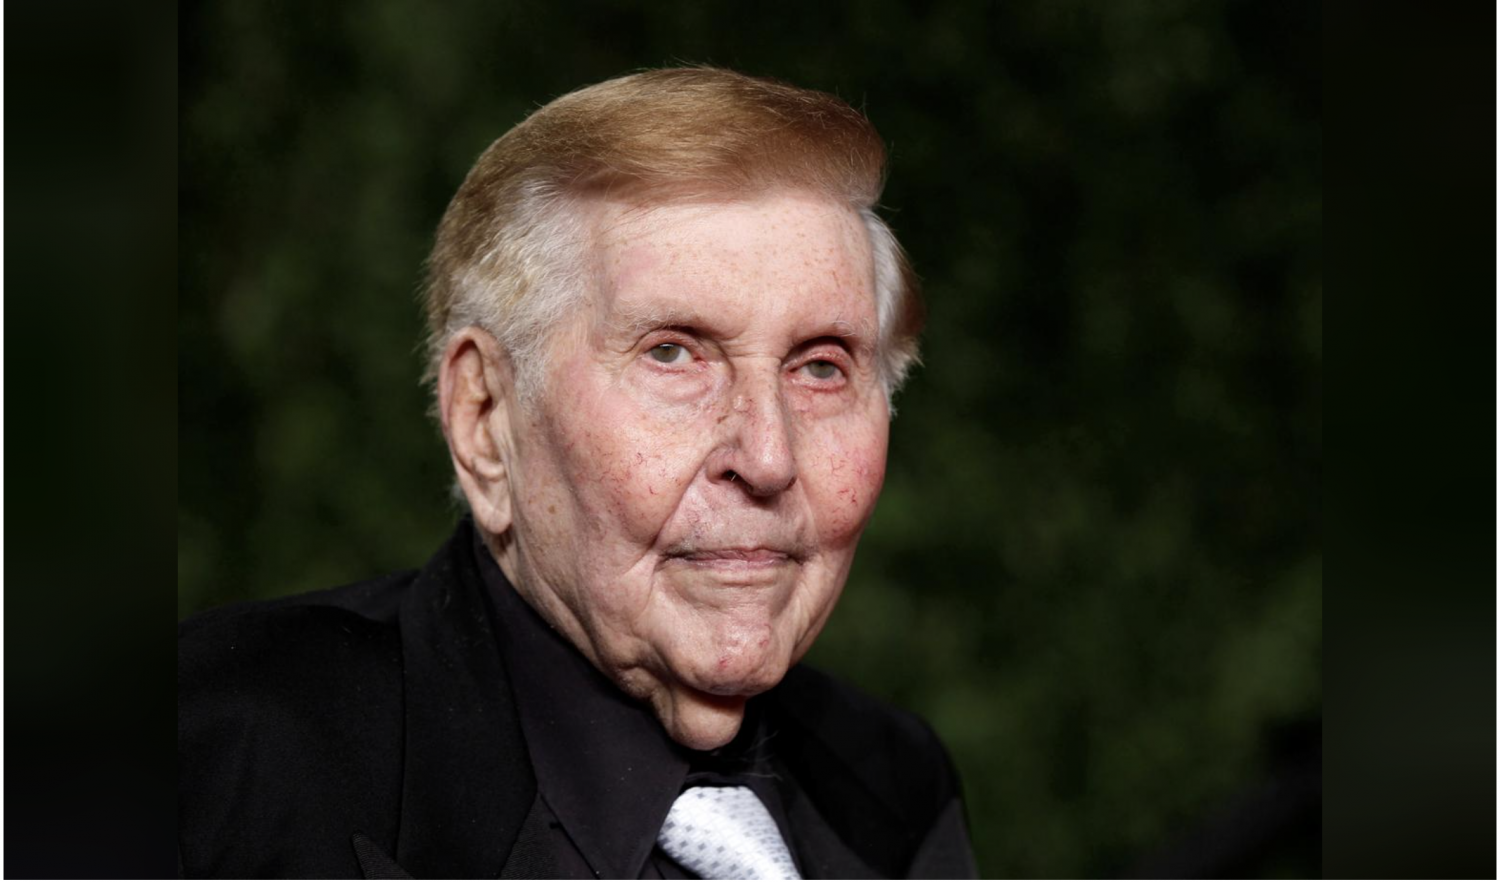 FILE PHOTO: Media magnate Sumner Redstone arrives at the 2011 Vanity Fair Oscar party in West Hollywood, California February 27, 2011. REUTERS/Danny Moloshok/File Photo